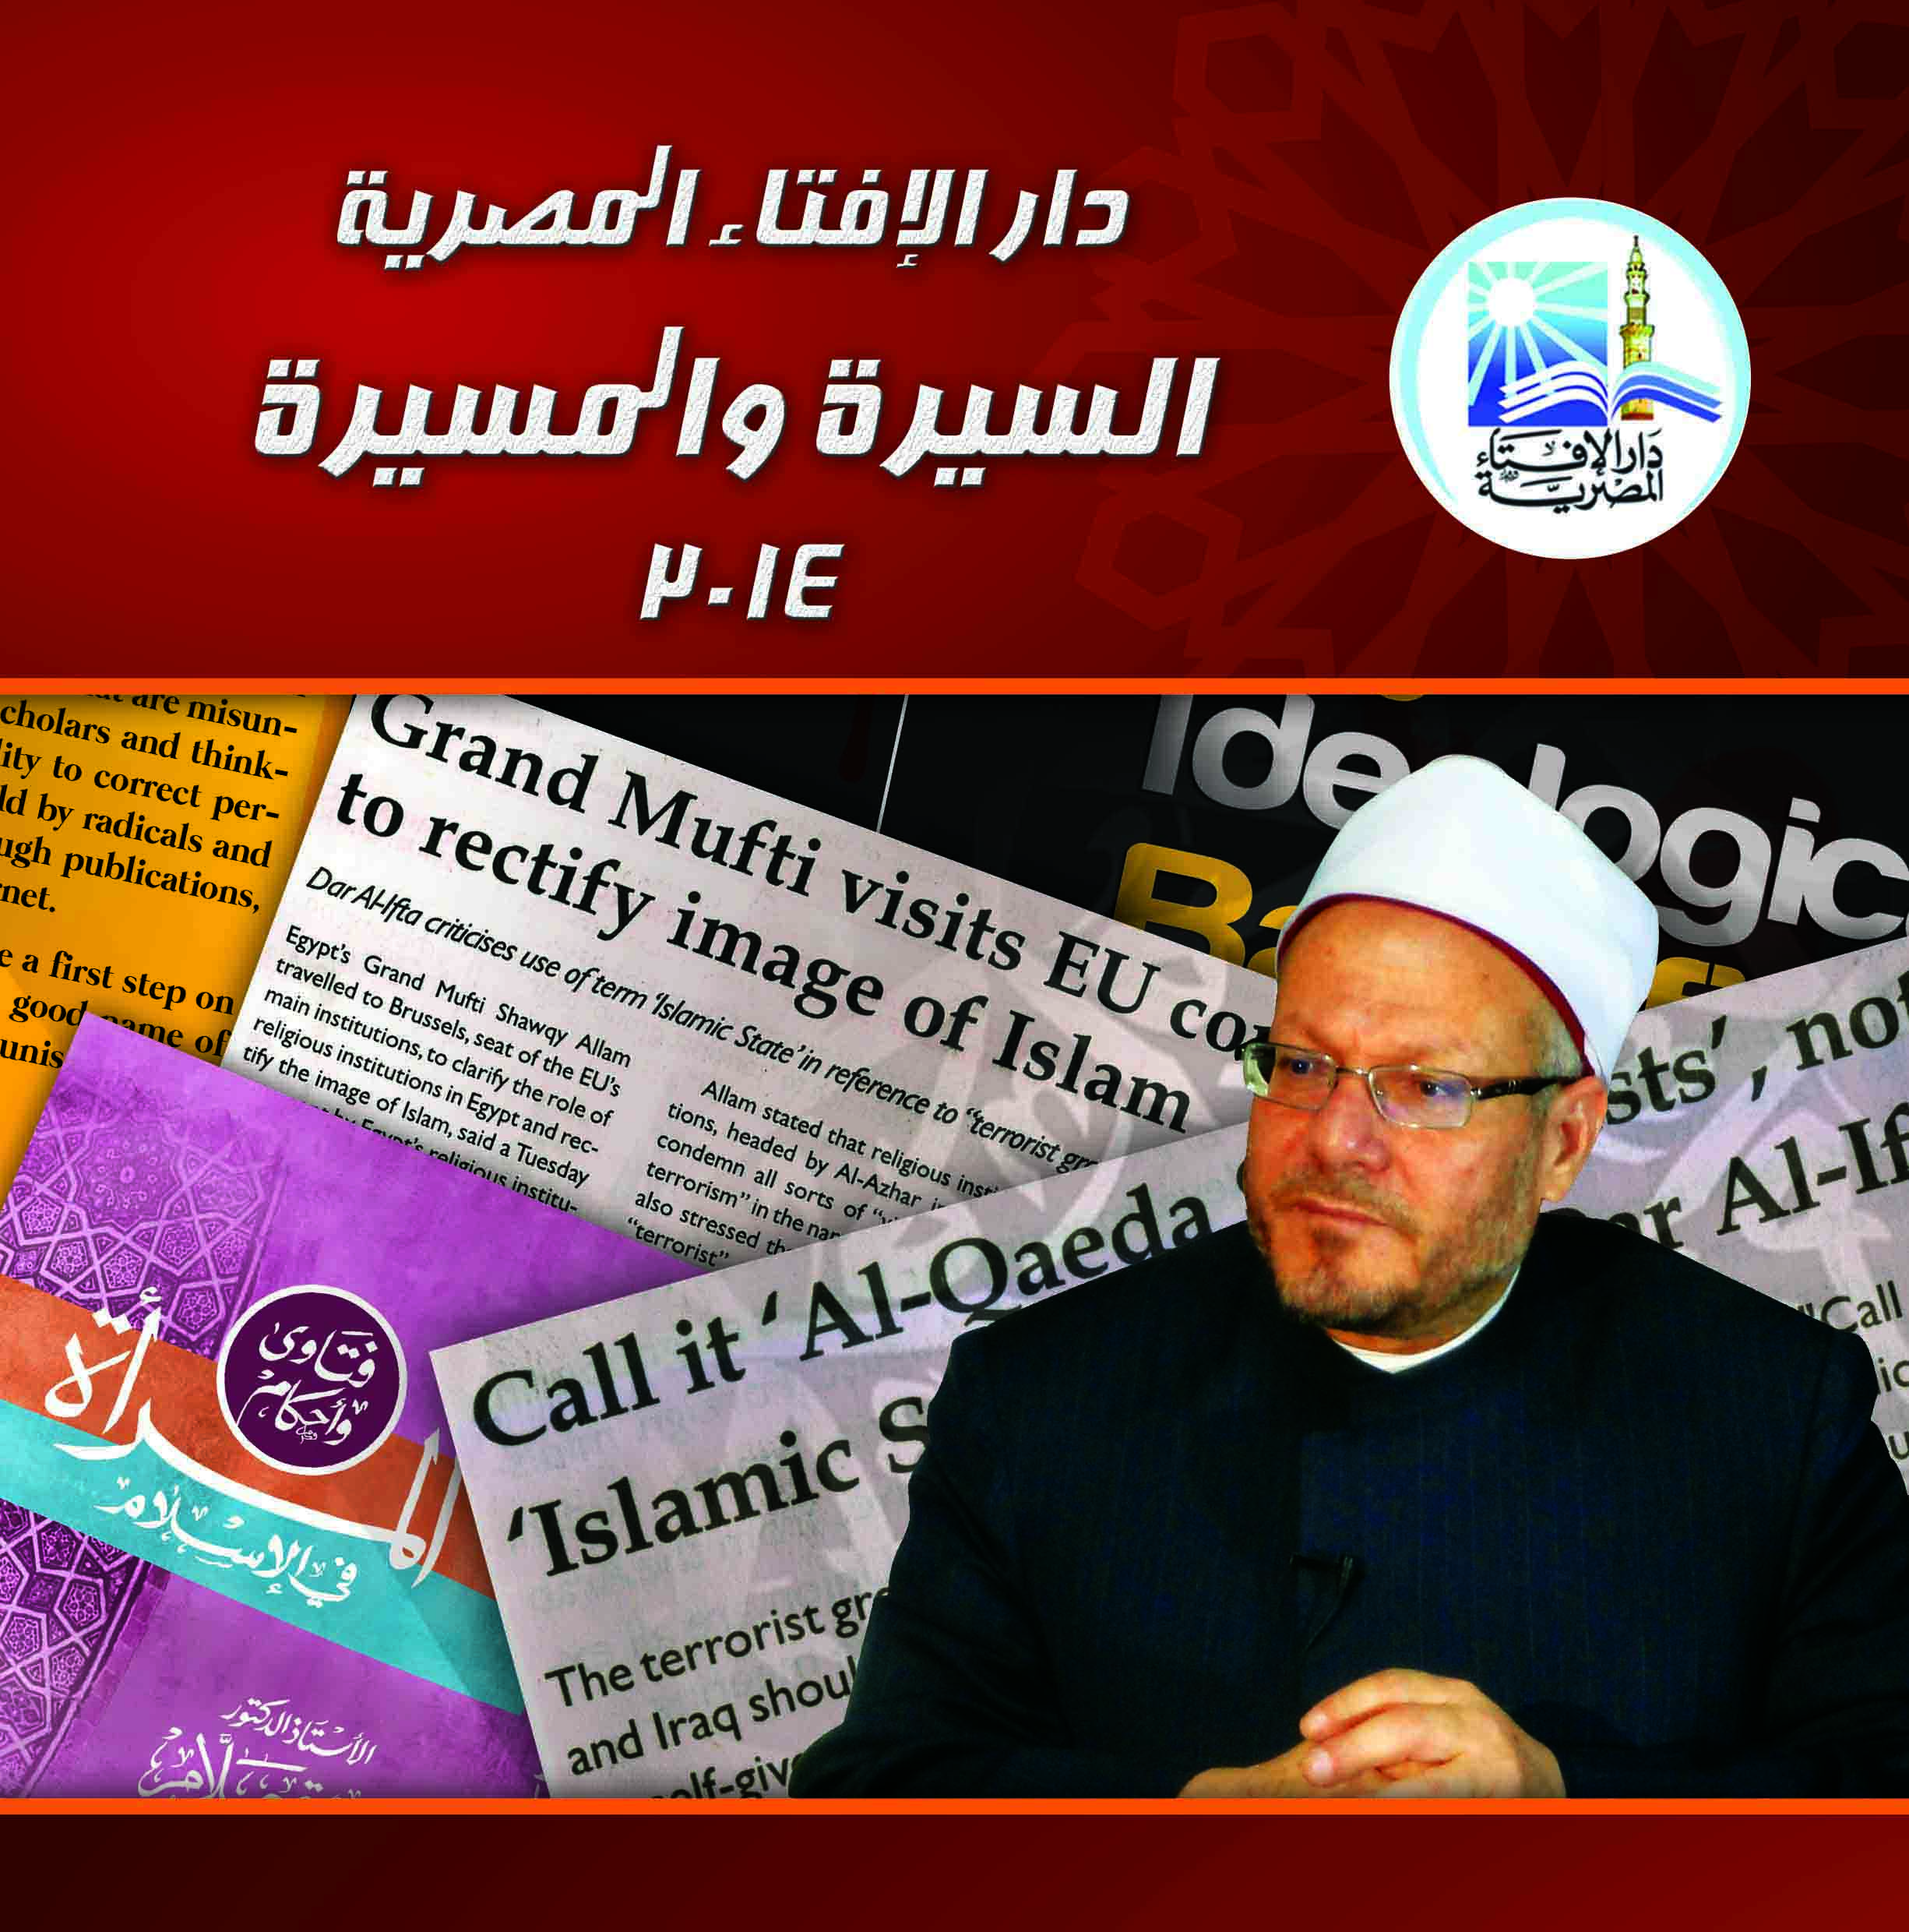 Dar al-Iftaa publishes a book to register its efforts in confronting radicalism 2014